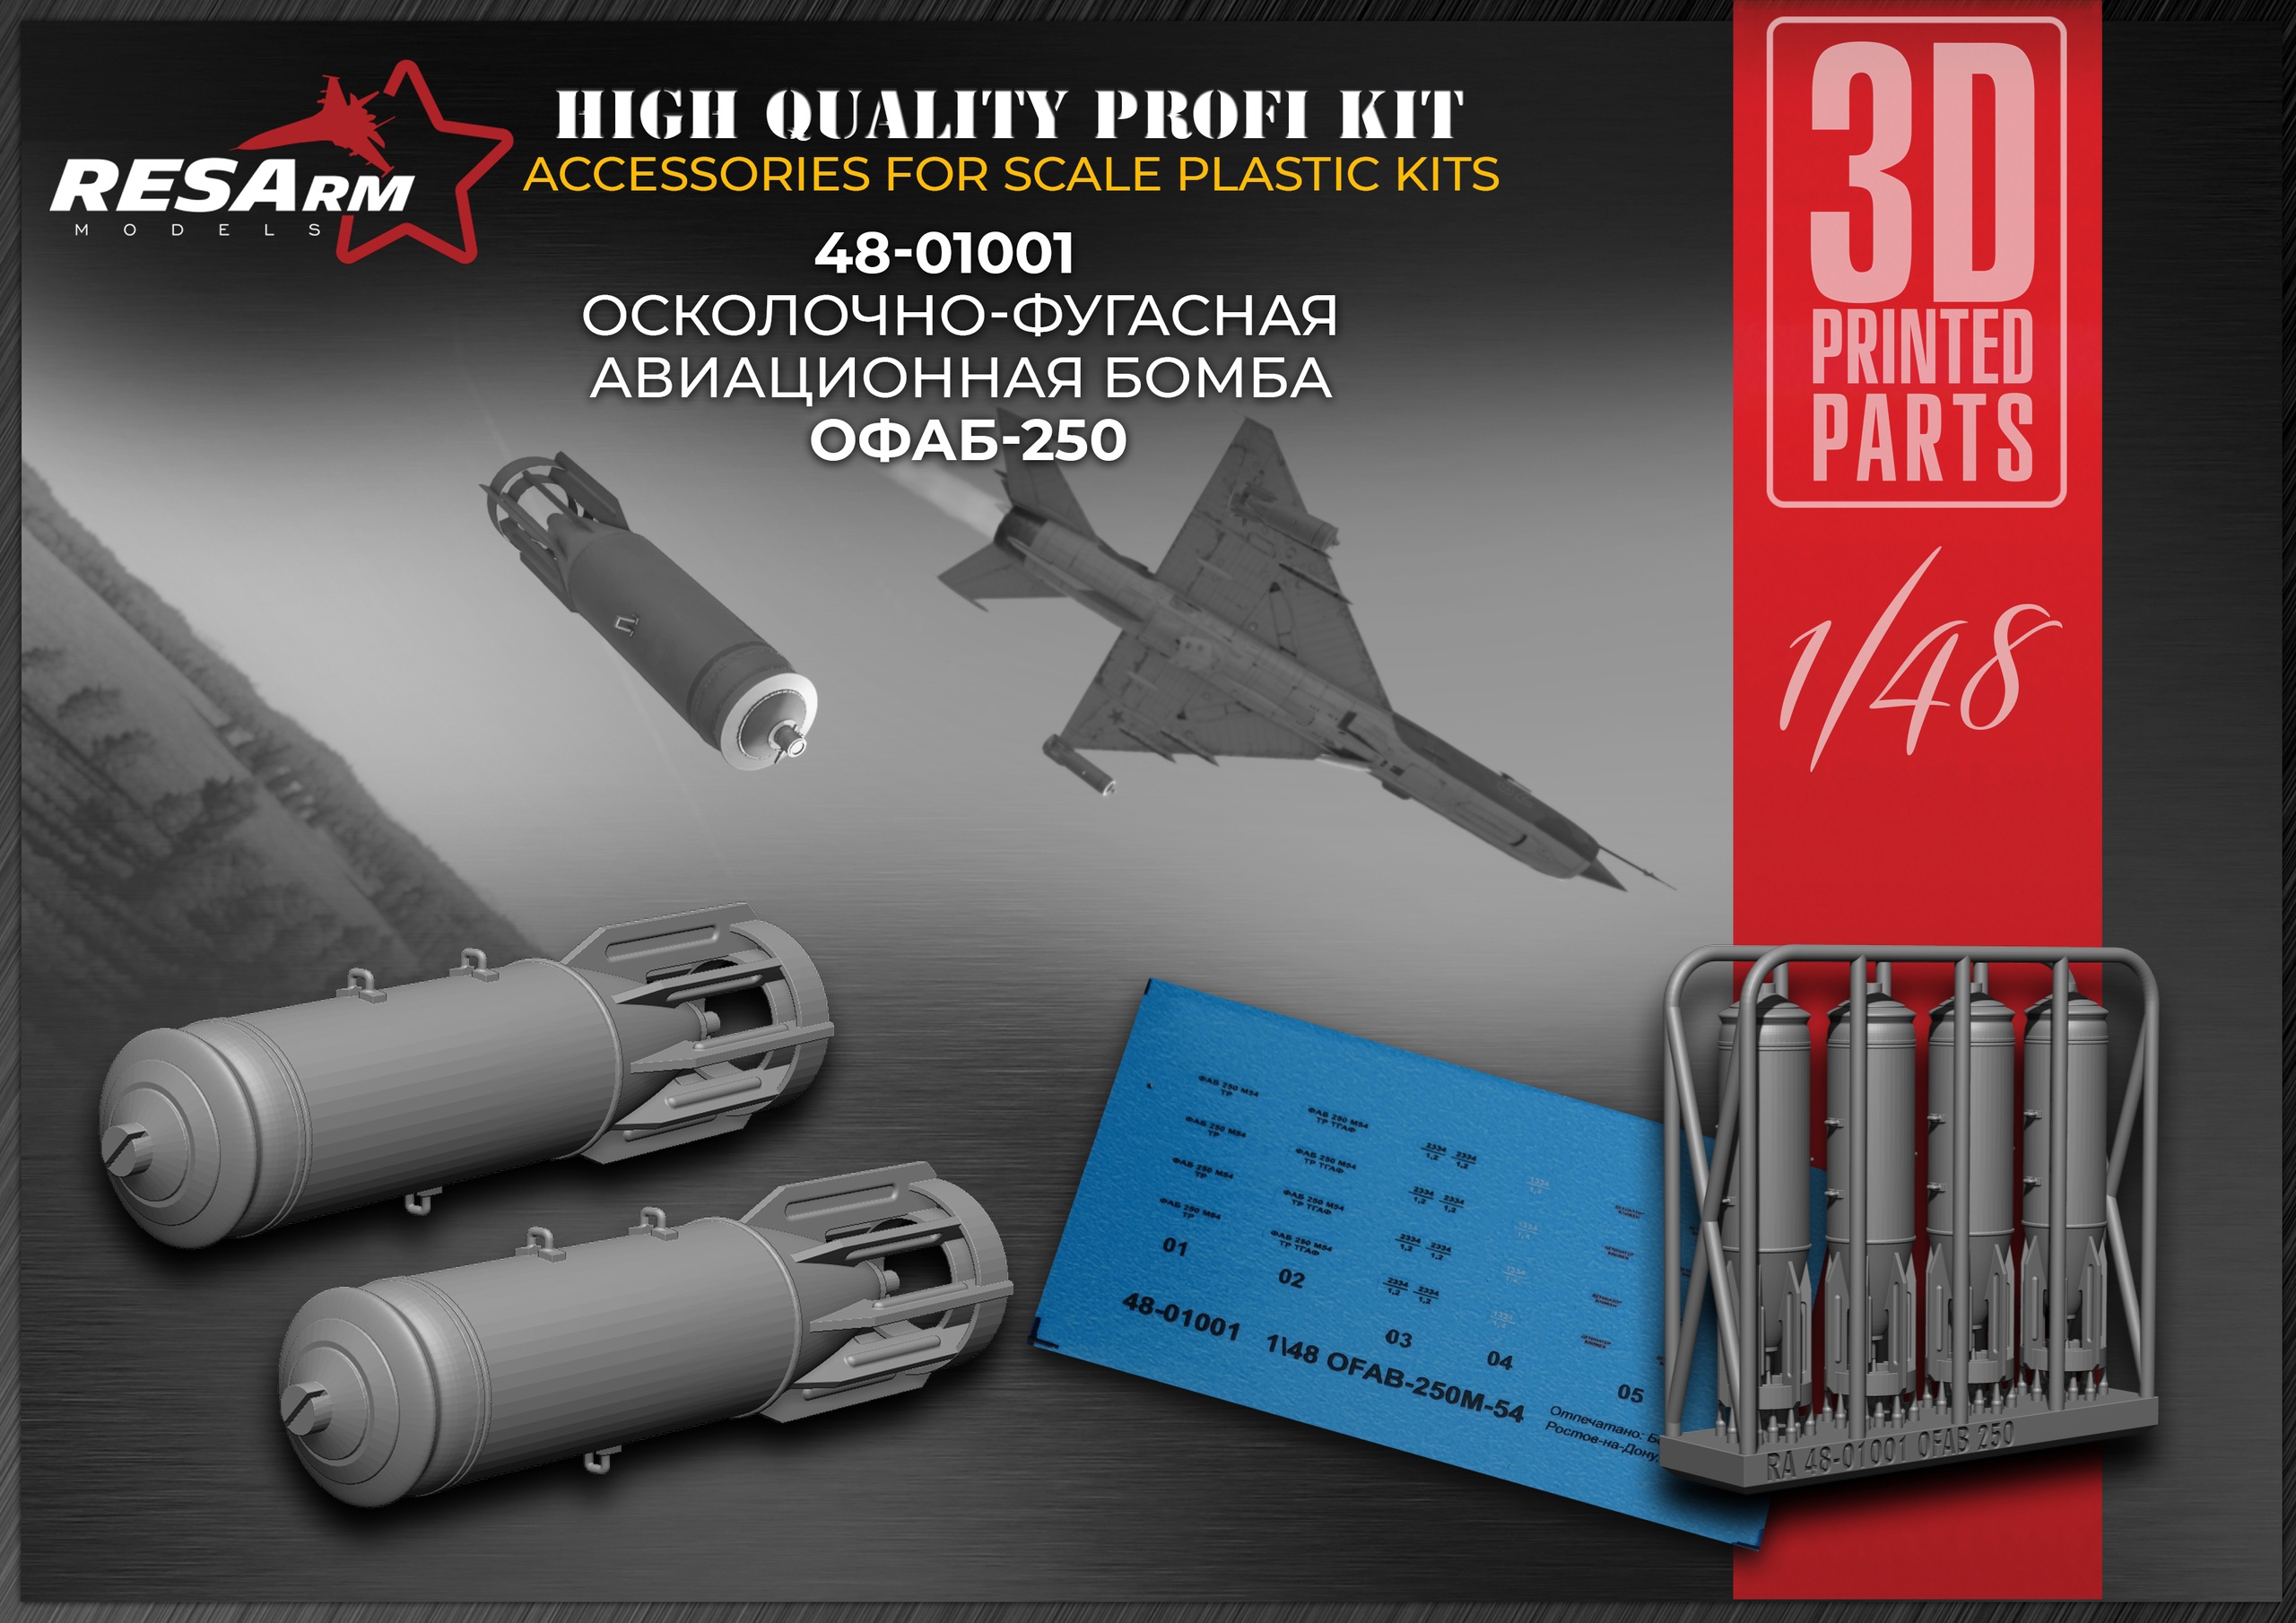 OFAB-250 fragmentation-fuzed aviation bomb (for pre-order with PRE-QNT4001 only)